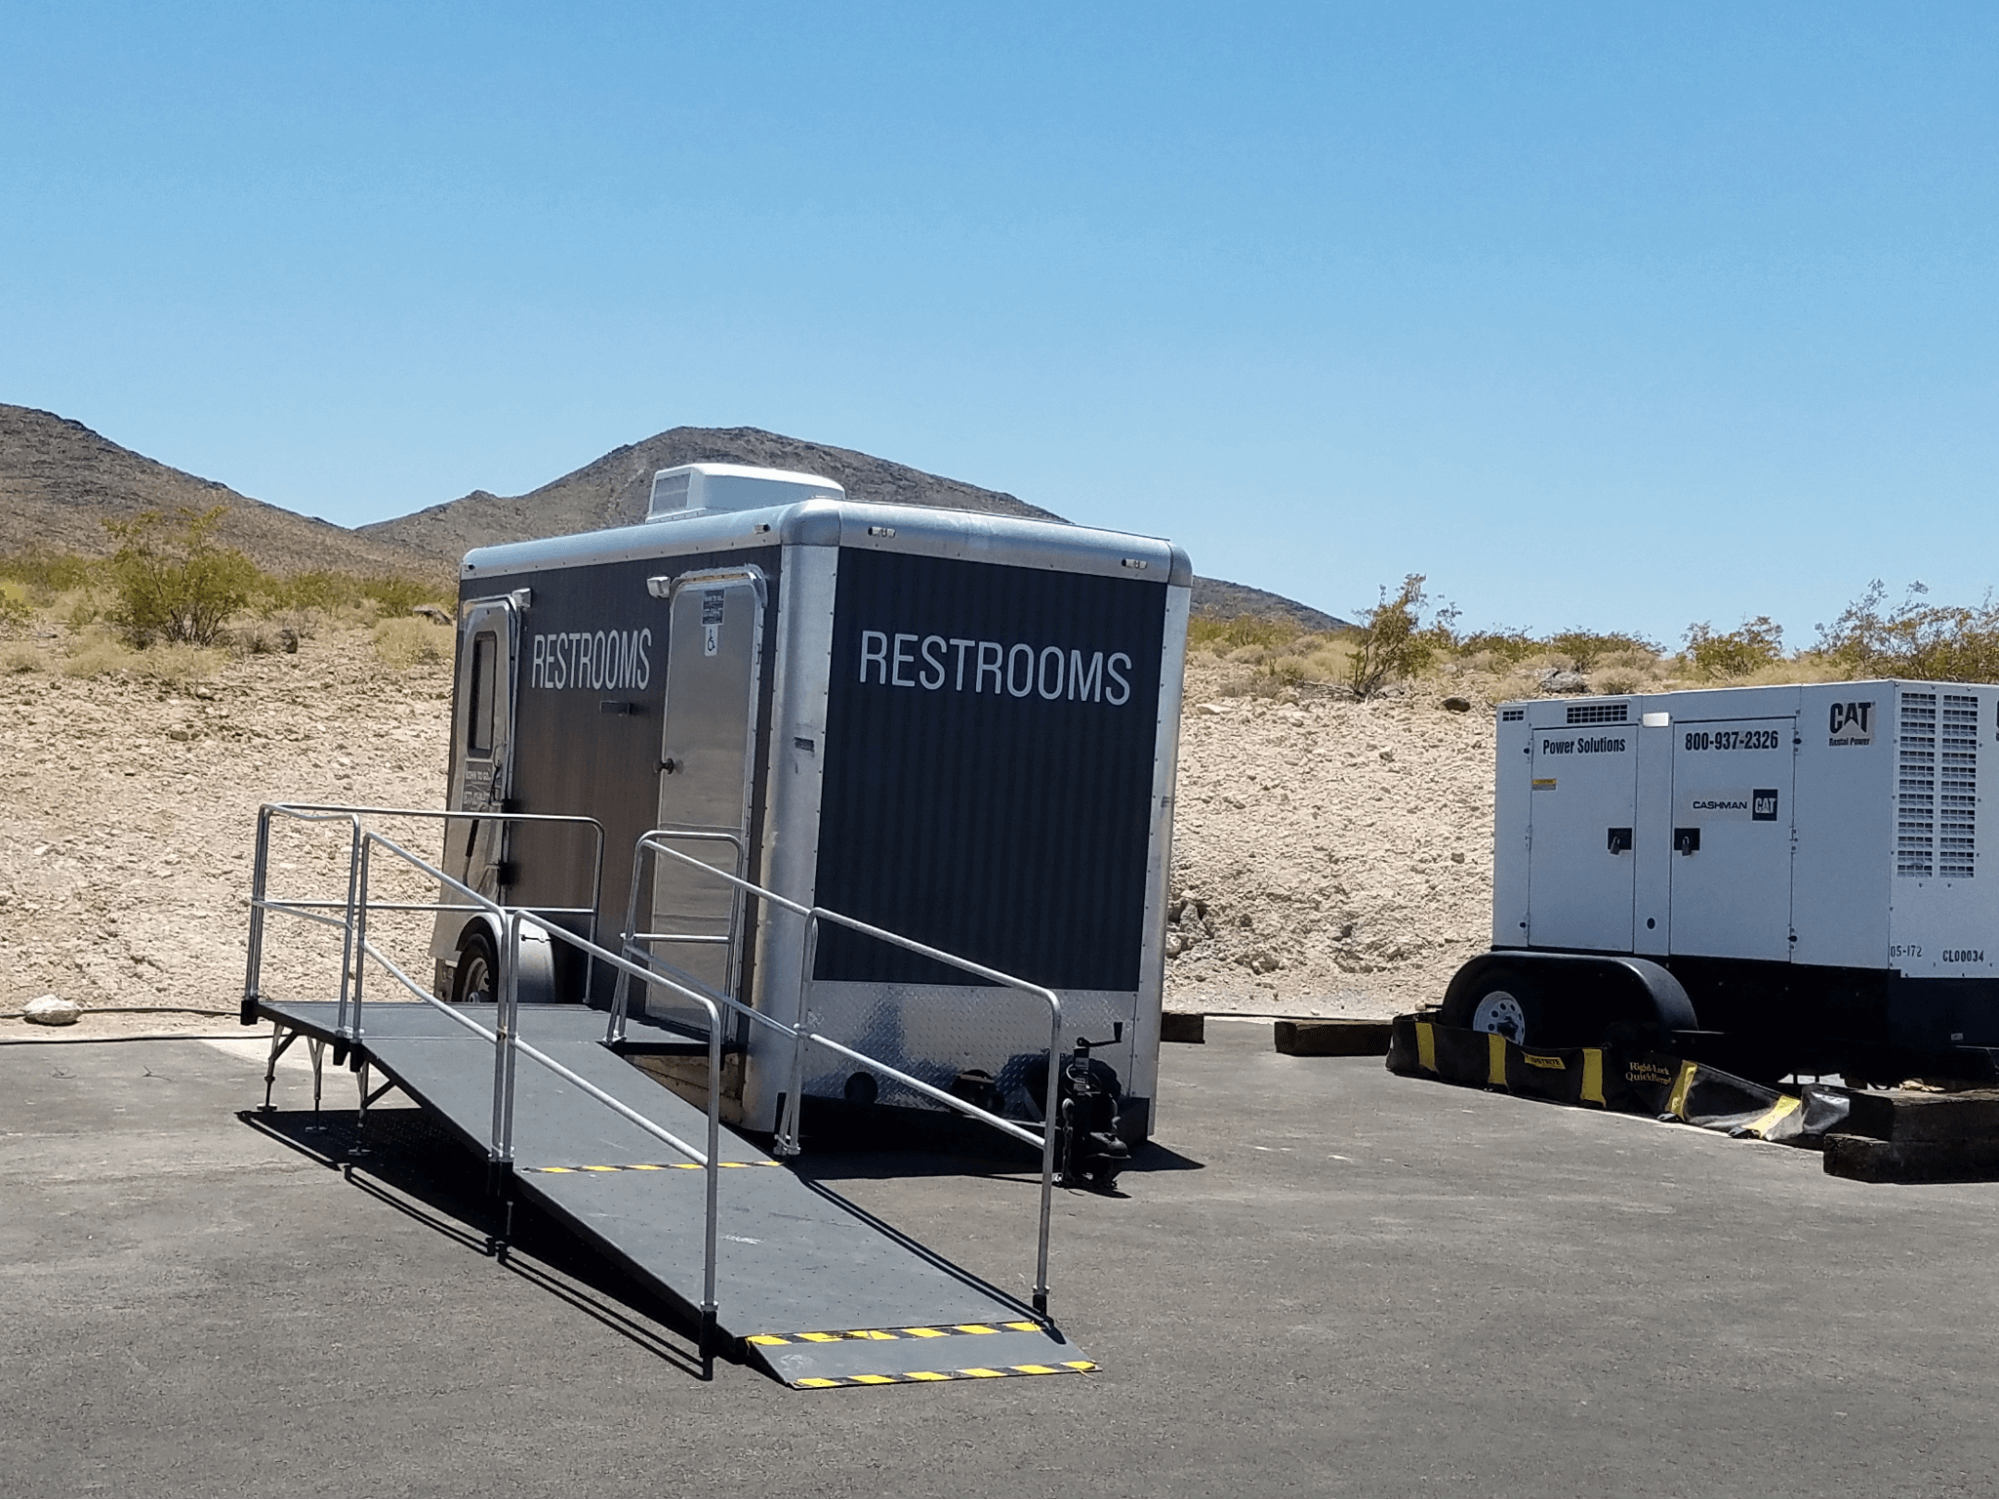 ADA-compliant portable restroom trailer parked outdoors